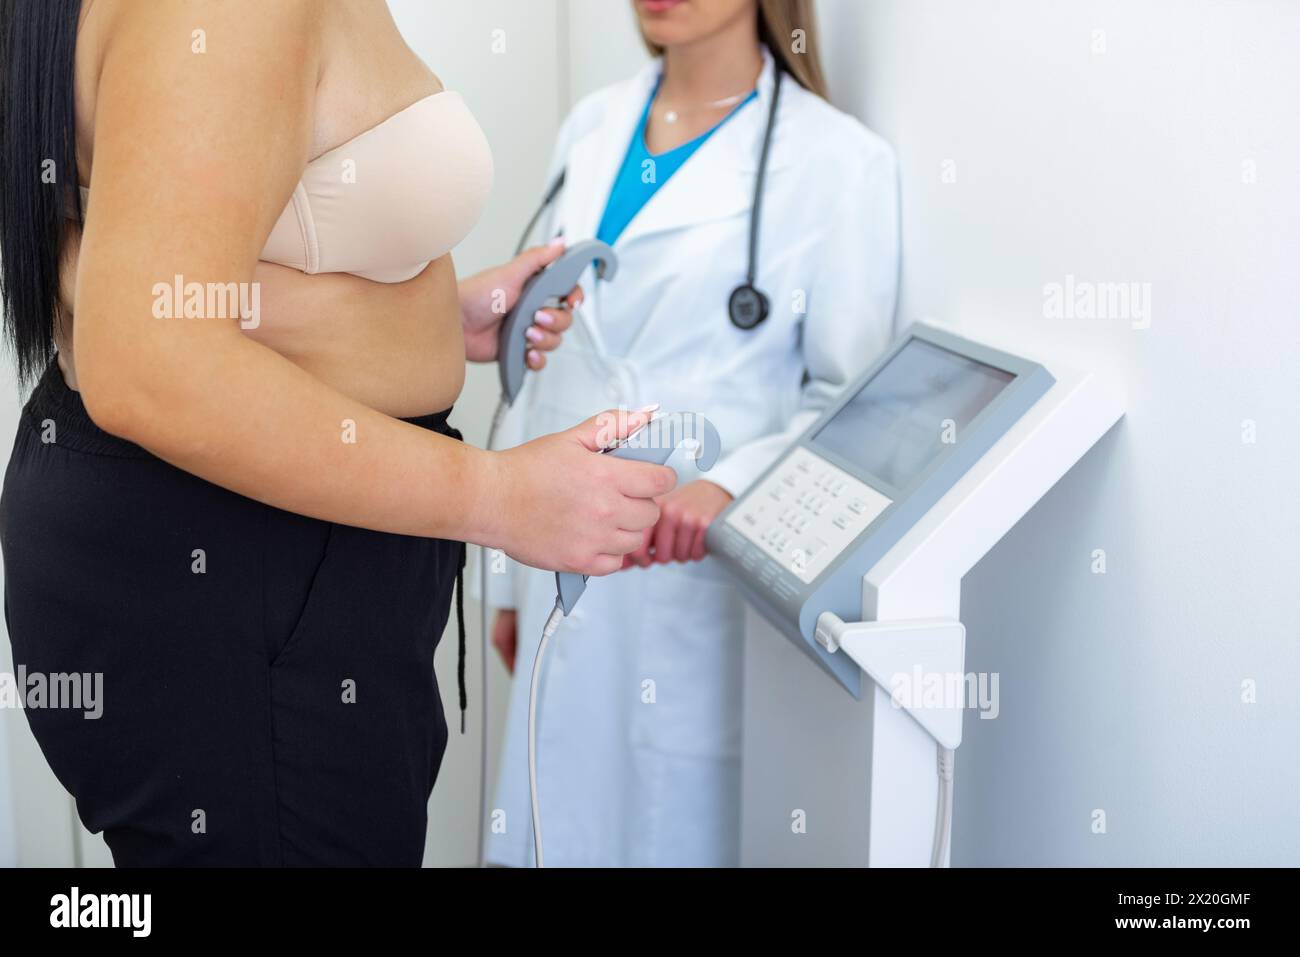 A health practitioner assists a woman with a body composition test using advanced equipment. Stock Photo